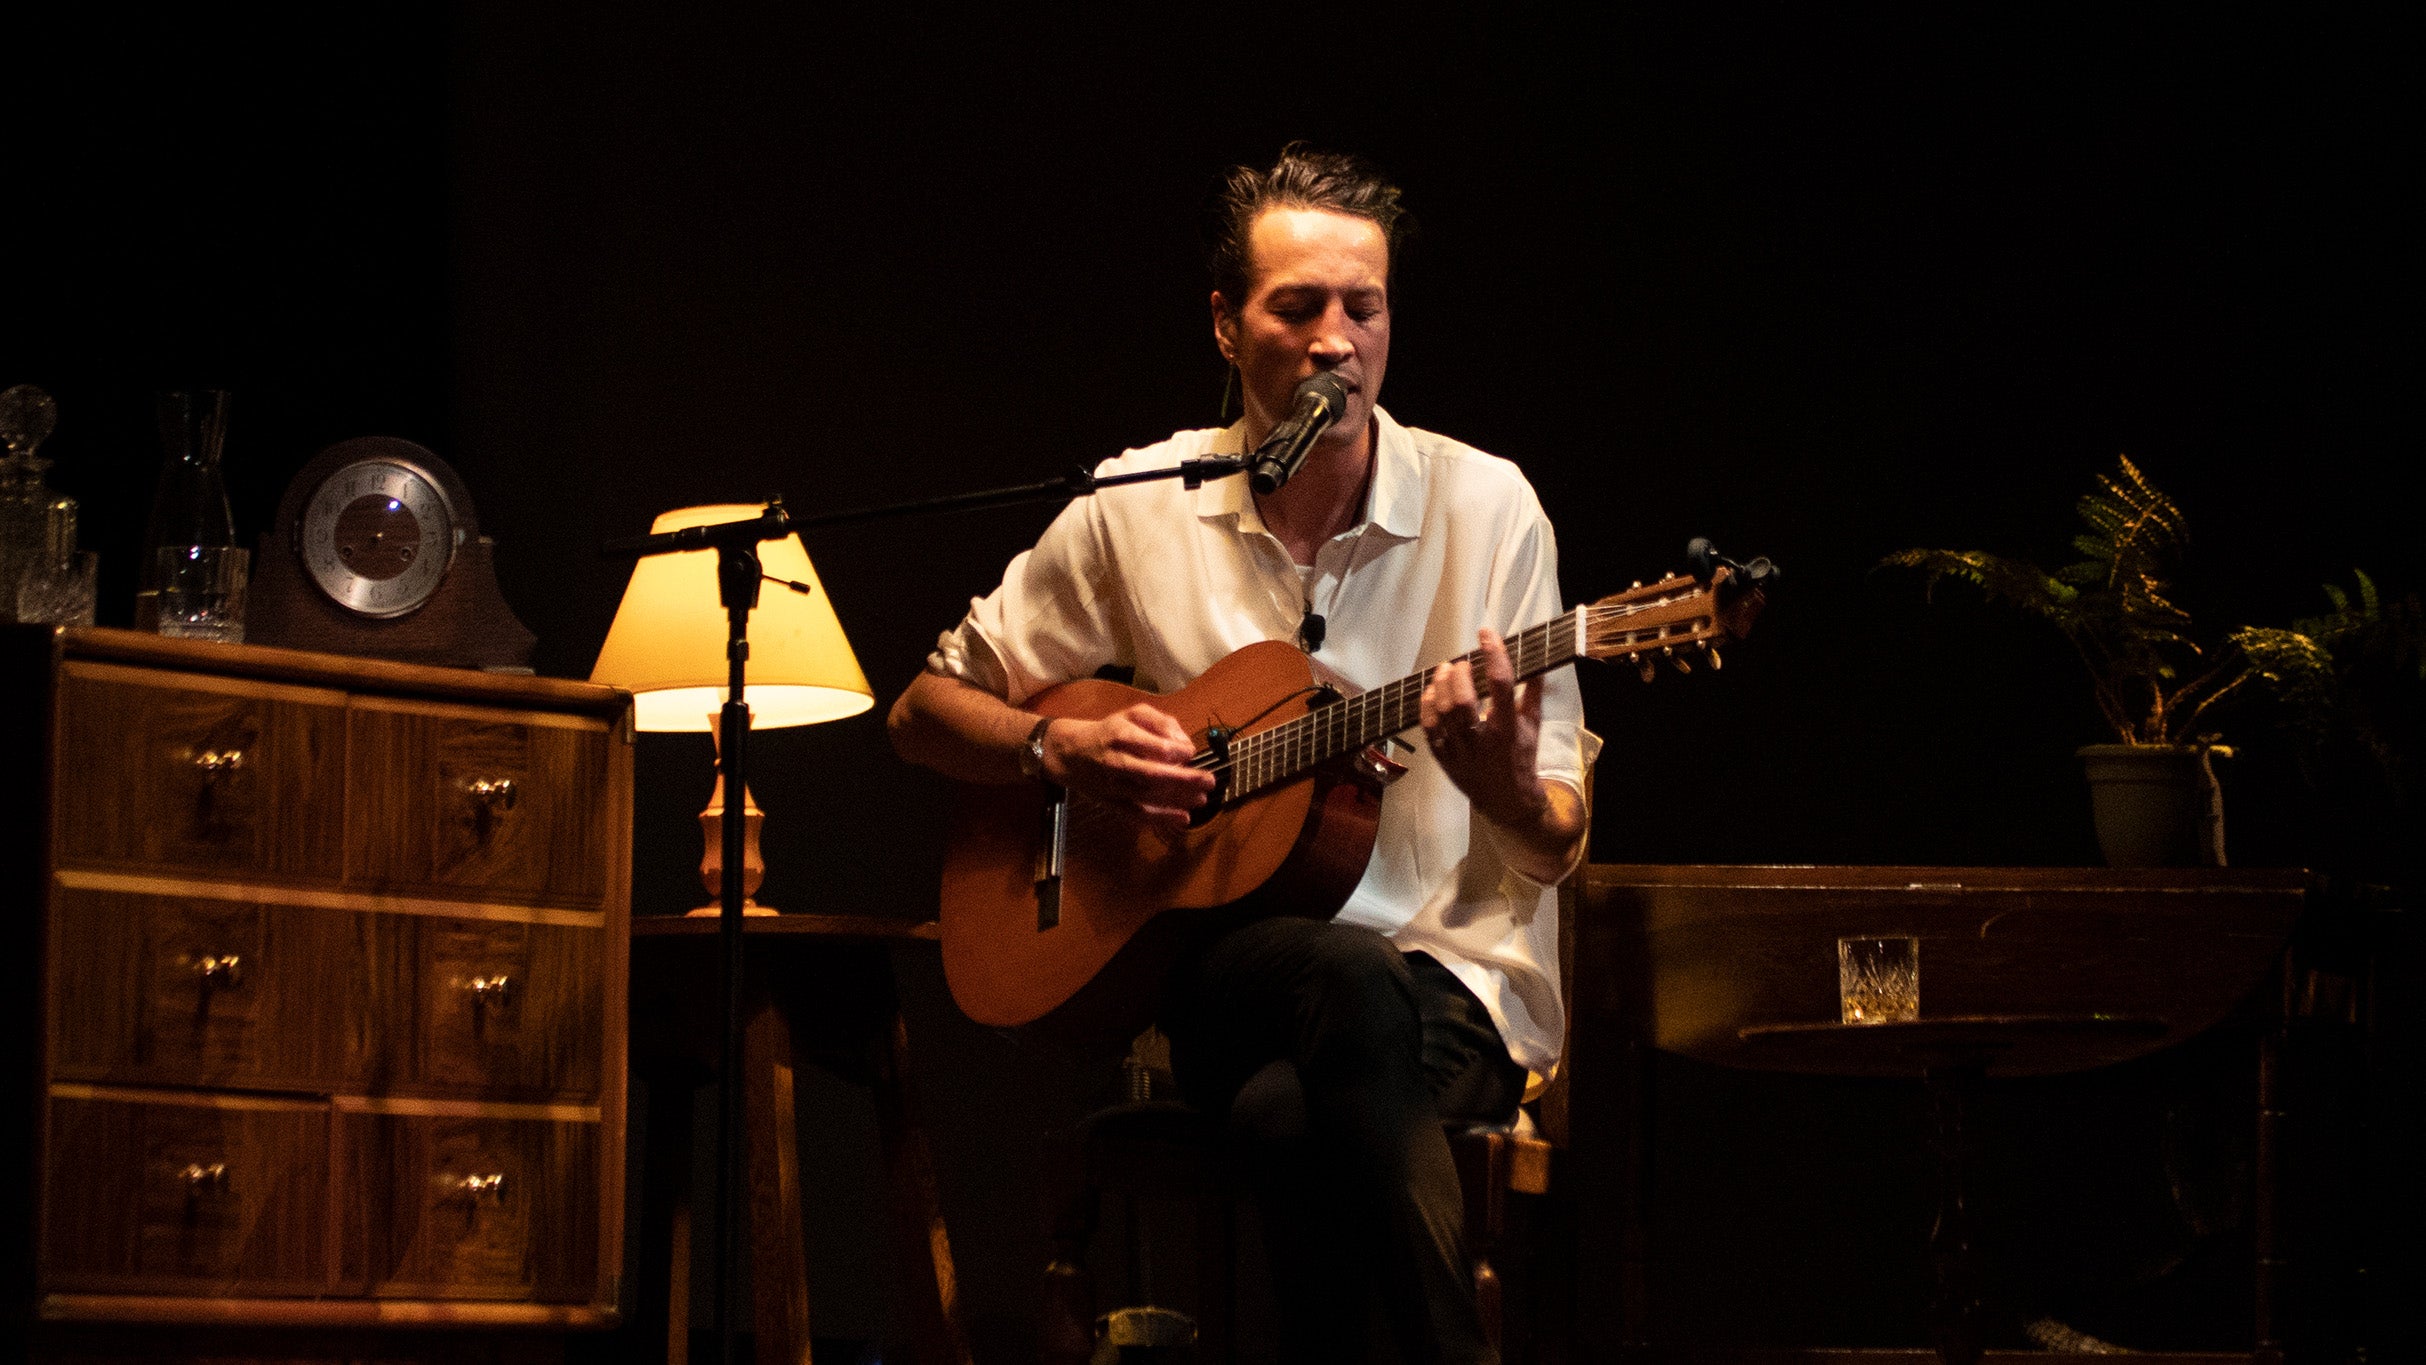 Marlon Williams in Thirroul promo photo for Exclusive presale offer code